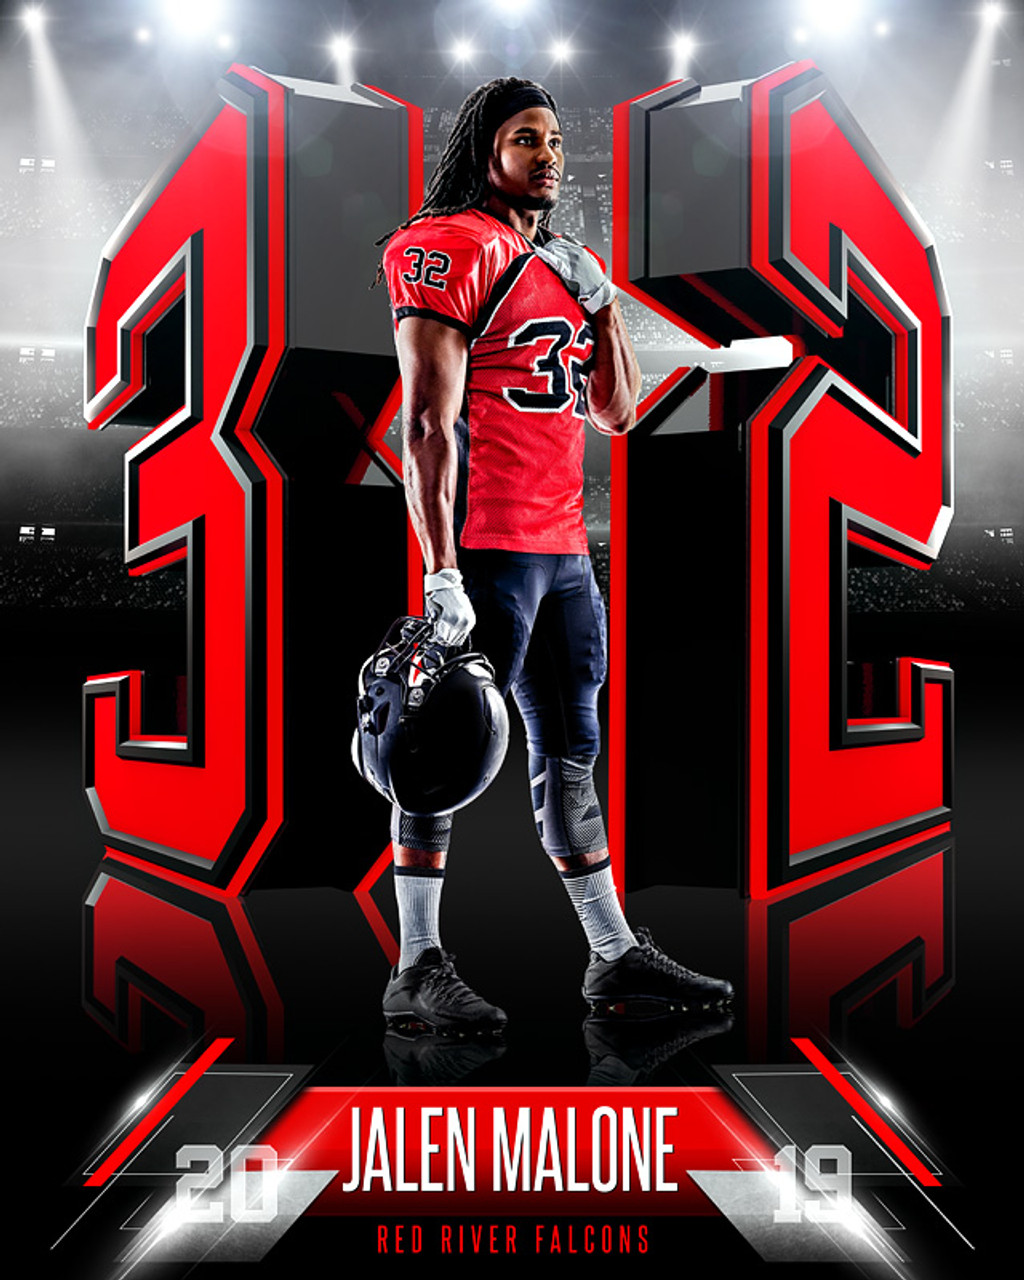 16x20 MULTI-SPORT POSTER - 3D NUMBERS - CUSTOM PHOTOSHOP LAYERED SPORTS TEMPLATE